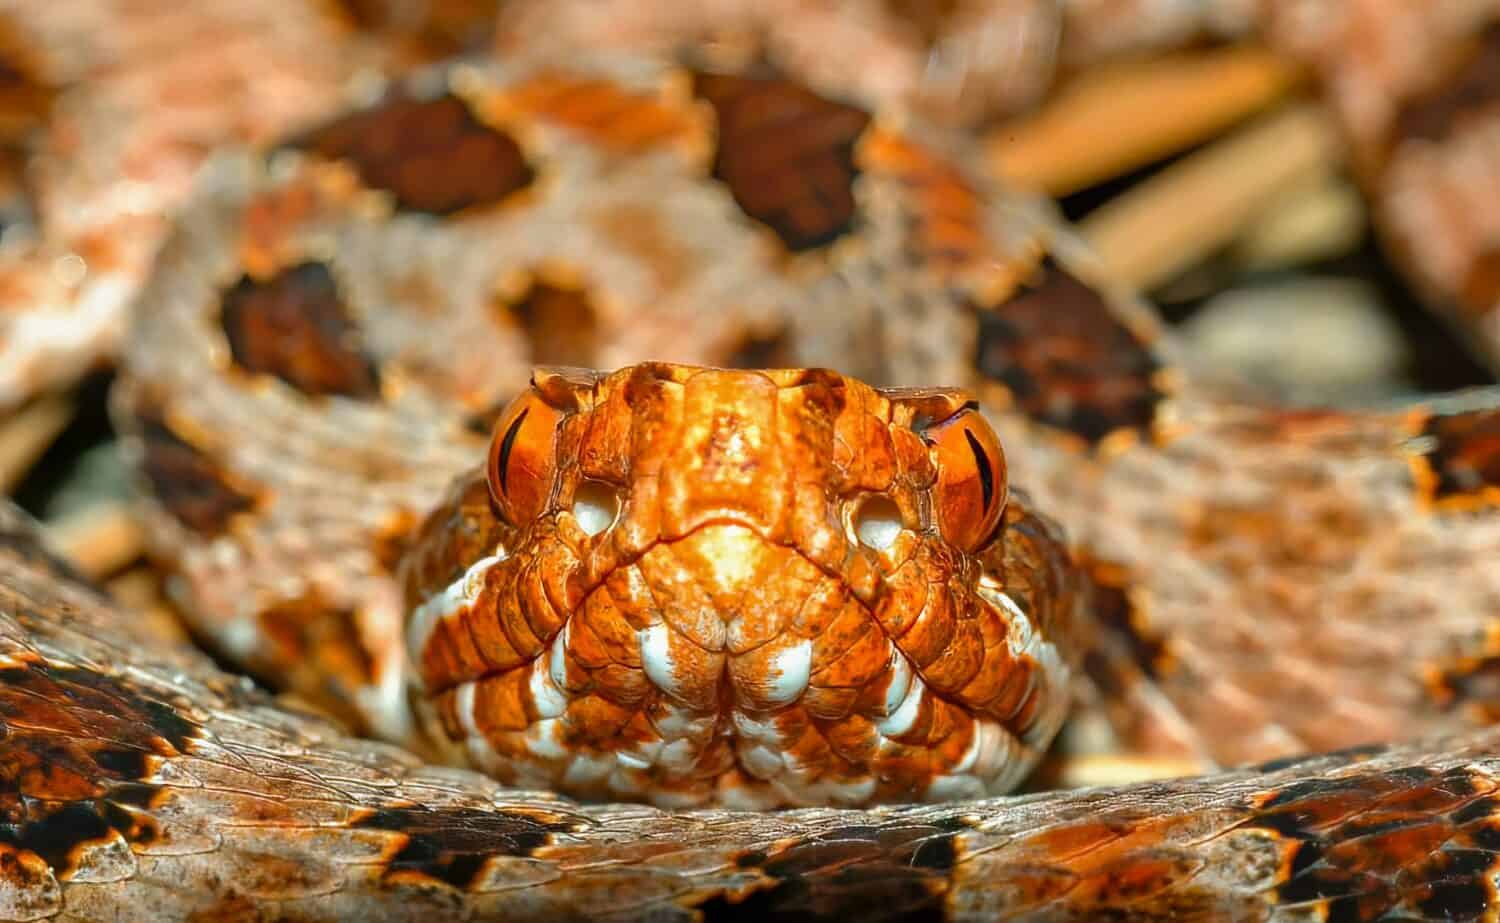 Close up view of red phase Carolina Pigmy or Pygmy rattlesnake - Sistrurus miliarius miliarus - front view of head and face showing heat sensing pits on either side.  Georgia North Carolina border. 